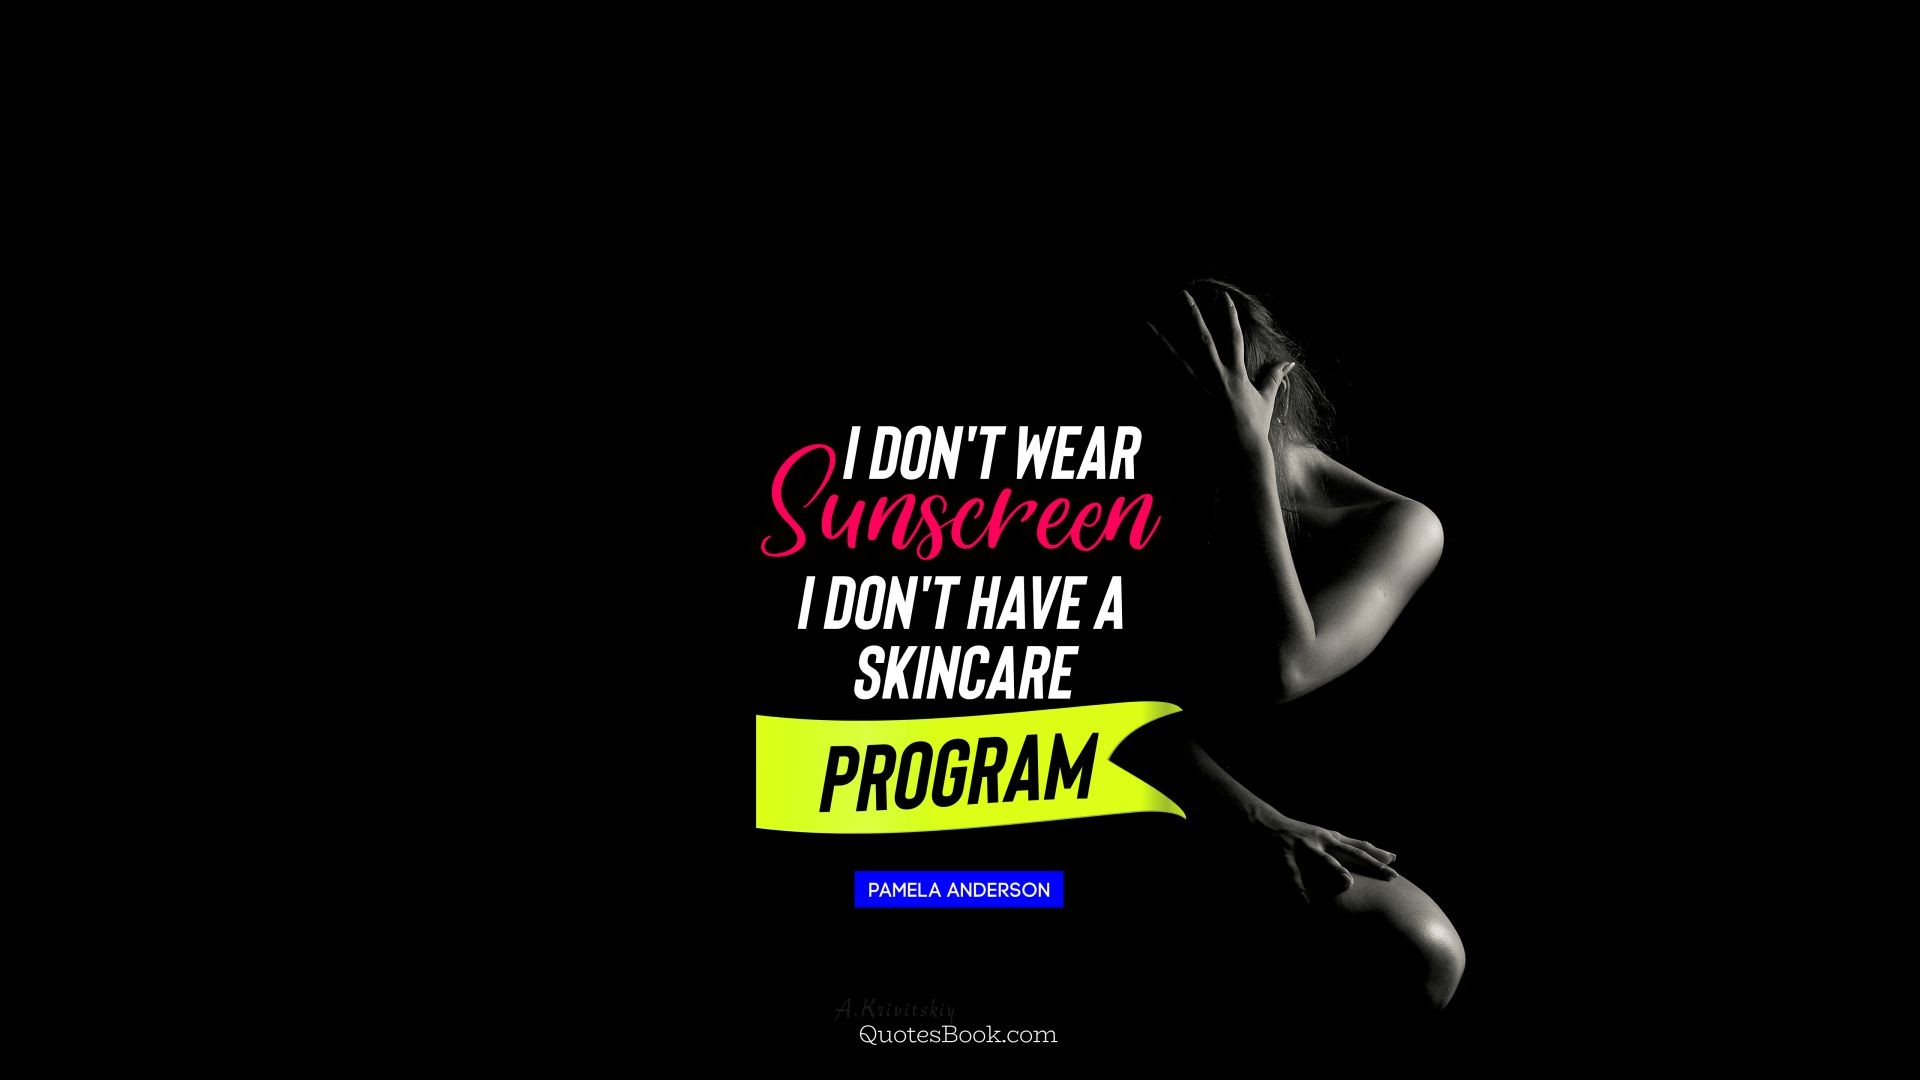 I don't wear sunscreen I don't have a skincare program. - Quote by Pamela Anderson